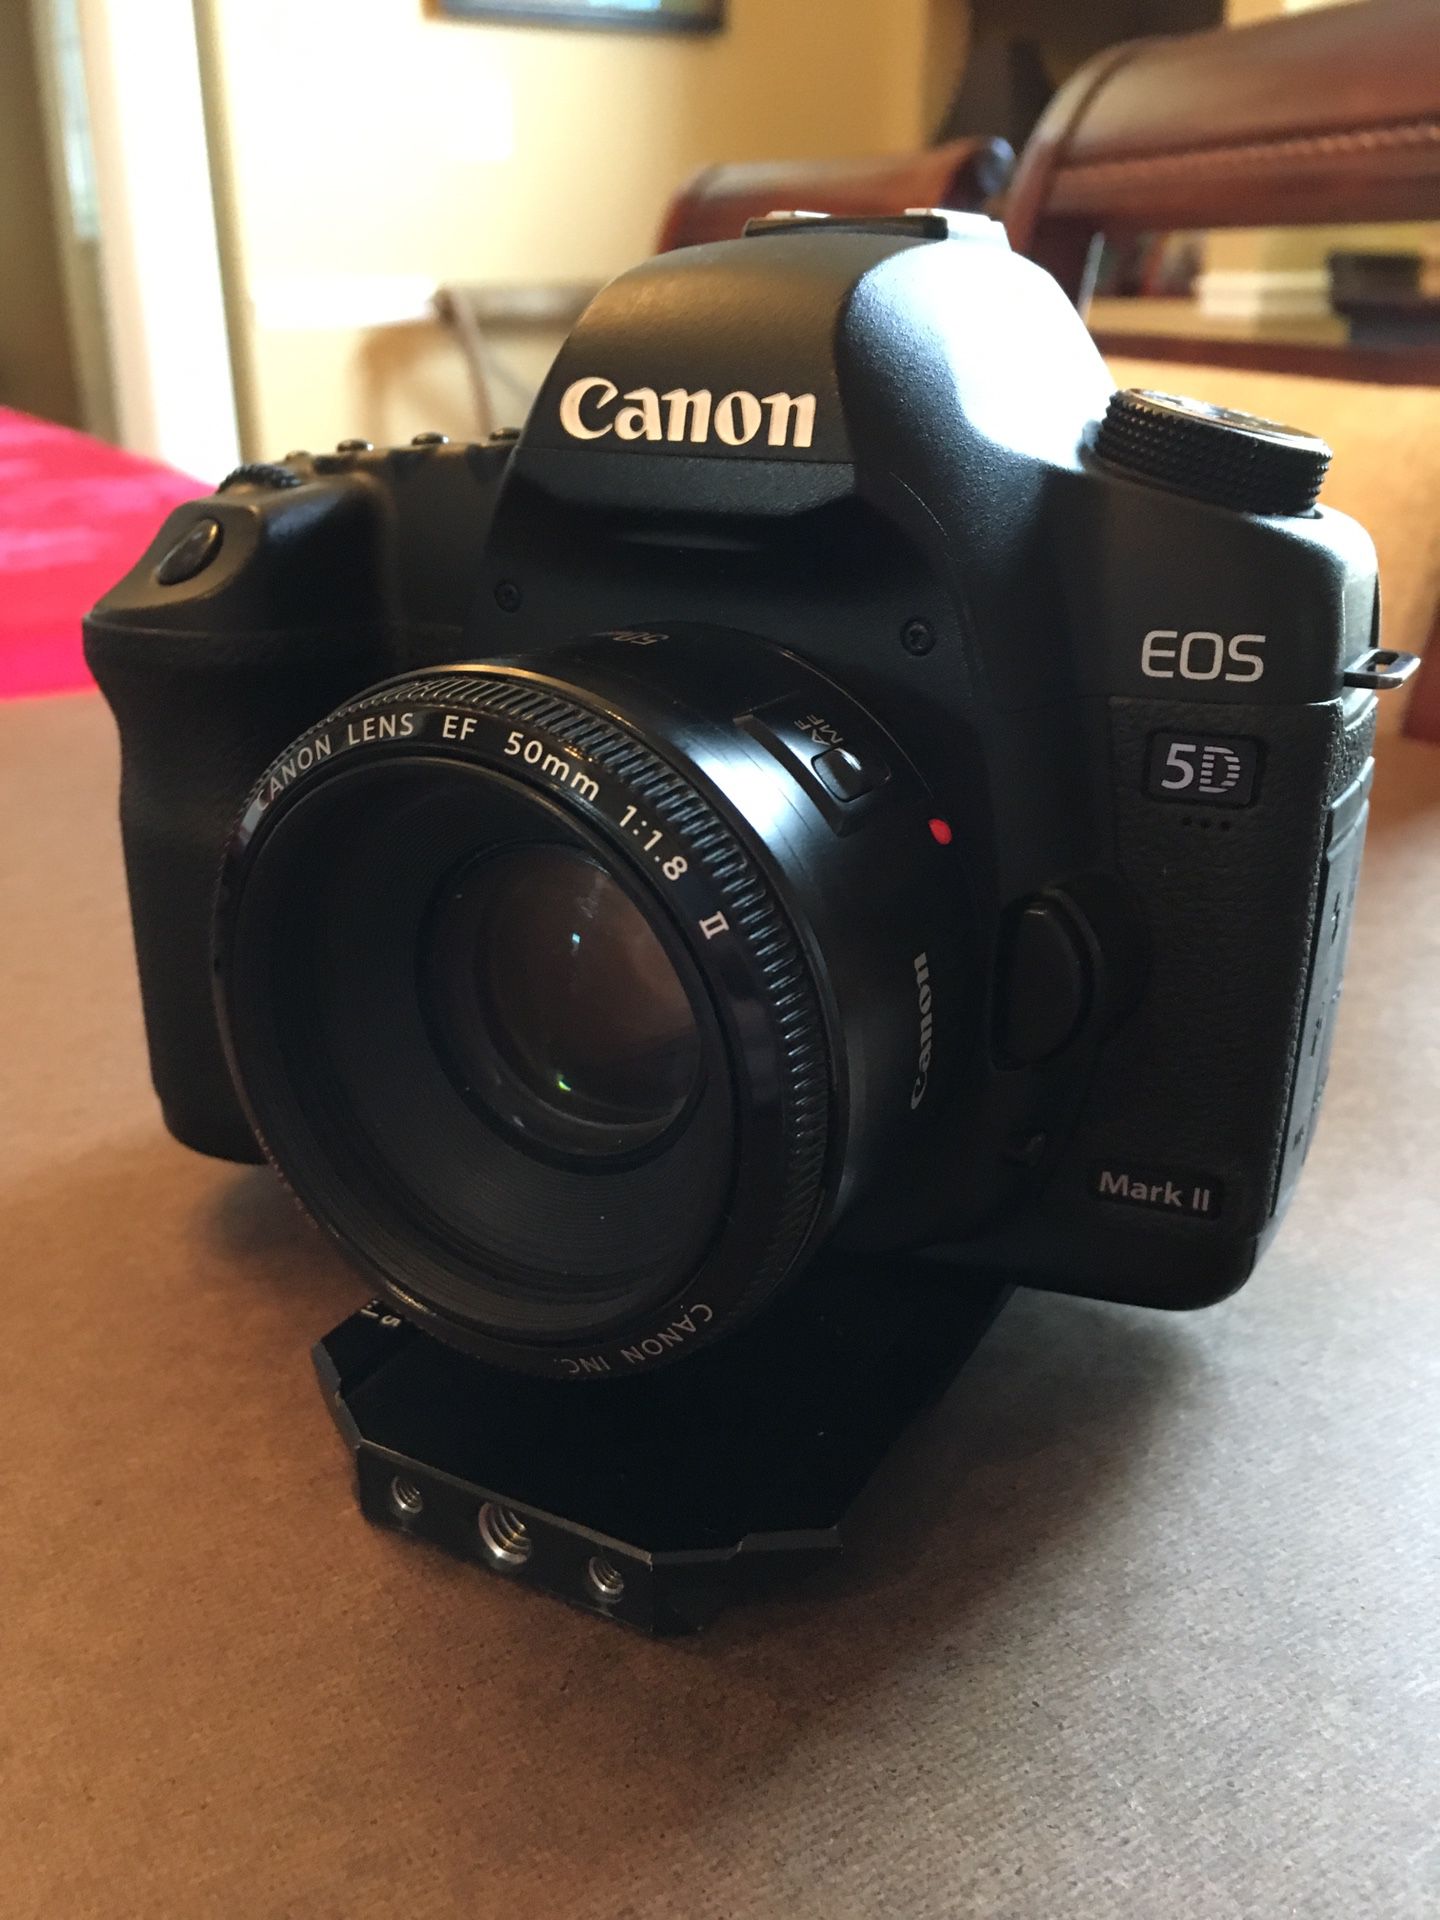 Canon 5d mkii camera, 50mm f/1.8 lens, and accessories bundle - $700